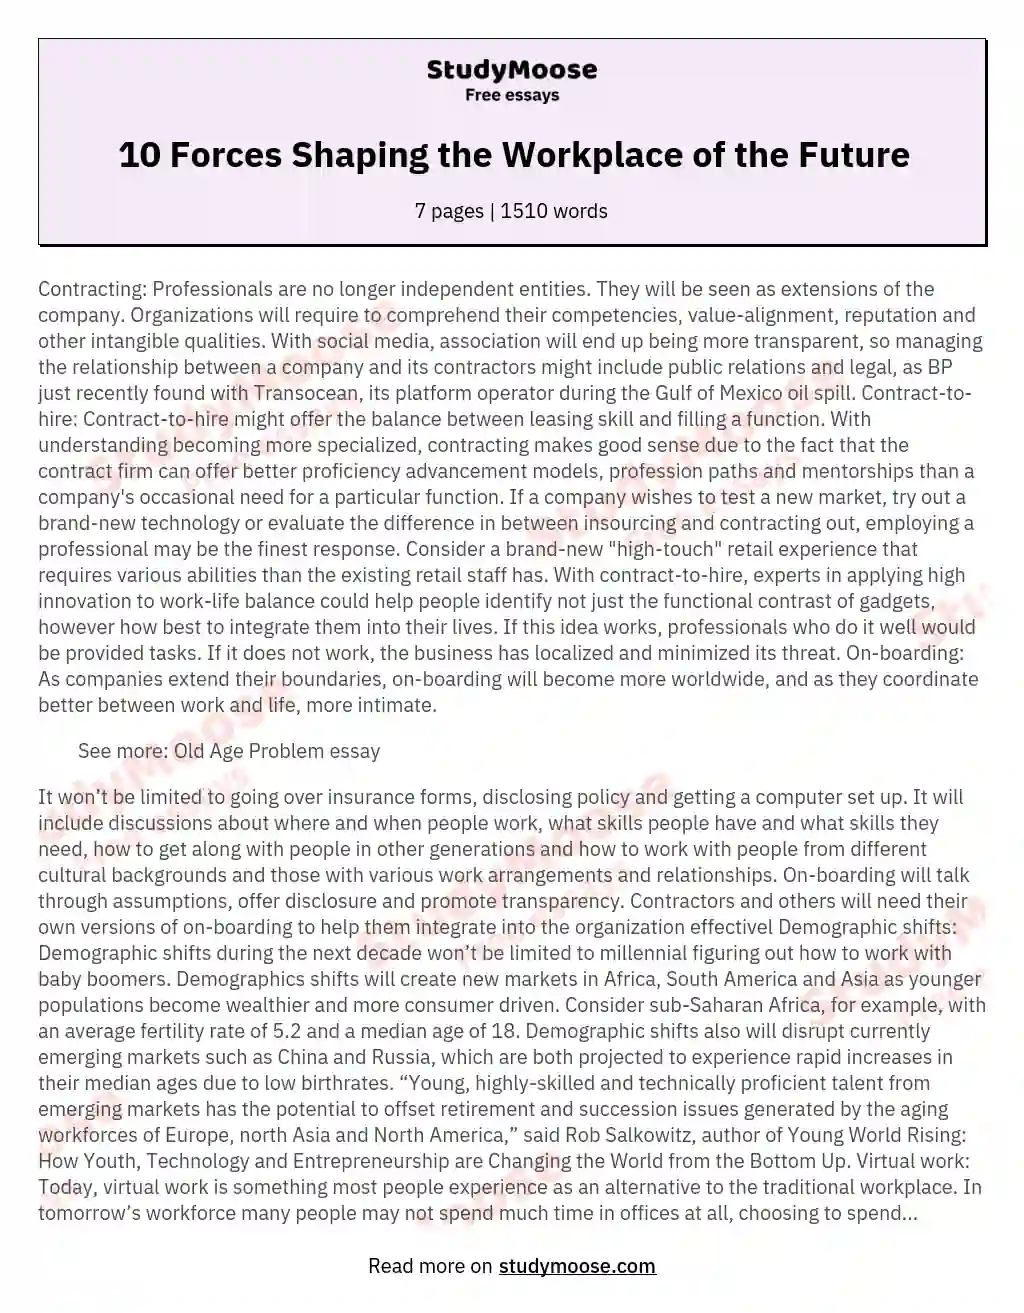 workplaces of the future essay